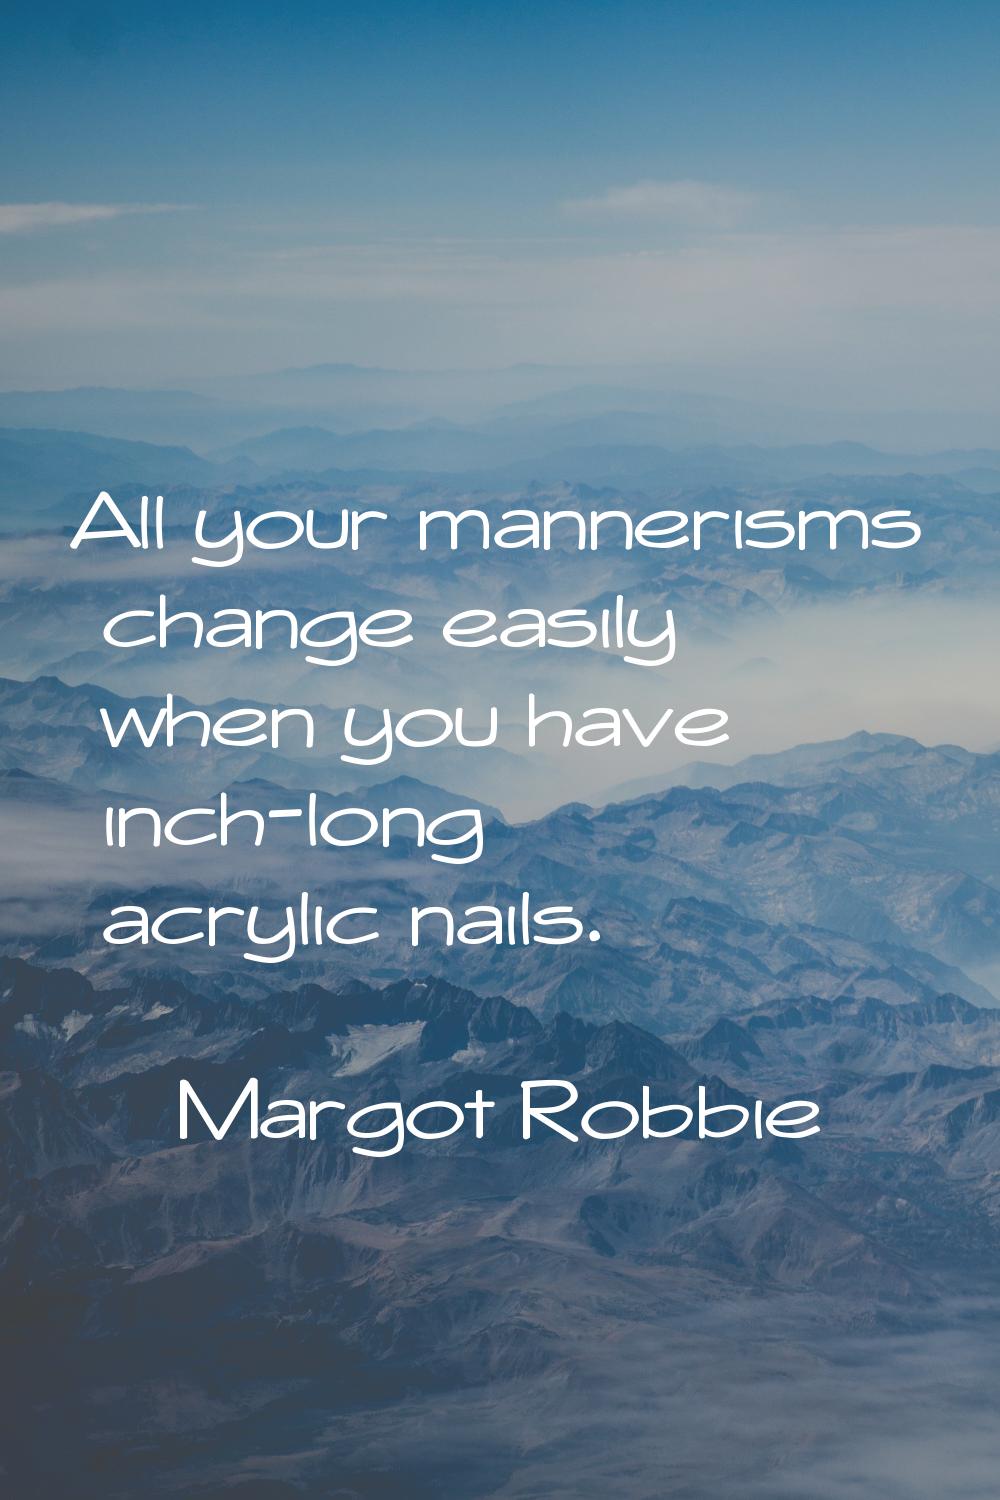 All your mannerisms change easily when you have inch-long acrylic nails.